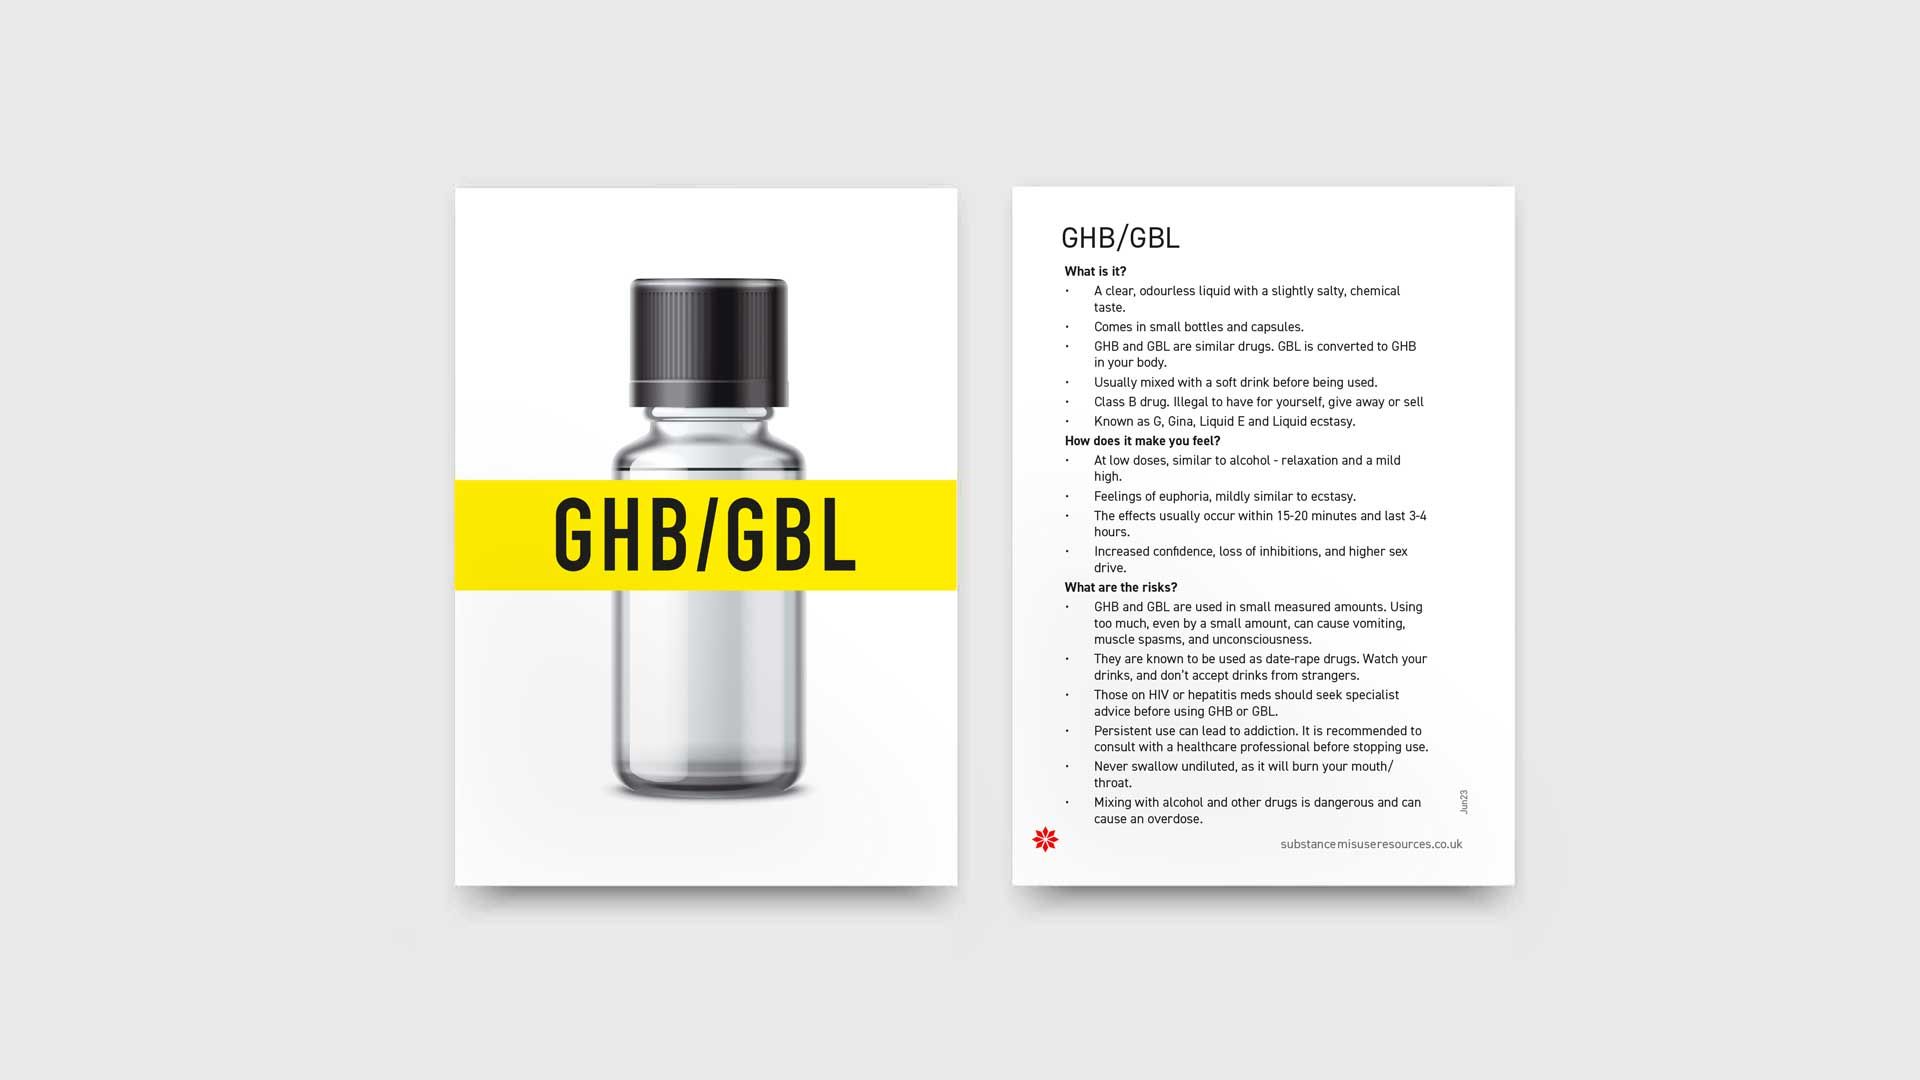 GHB/GBL information resource. GHB bottle on front and GHB information on reverse